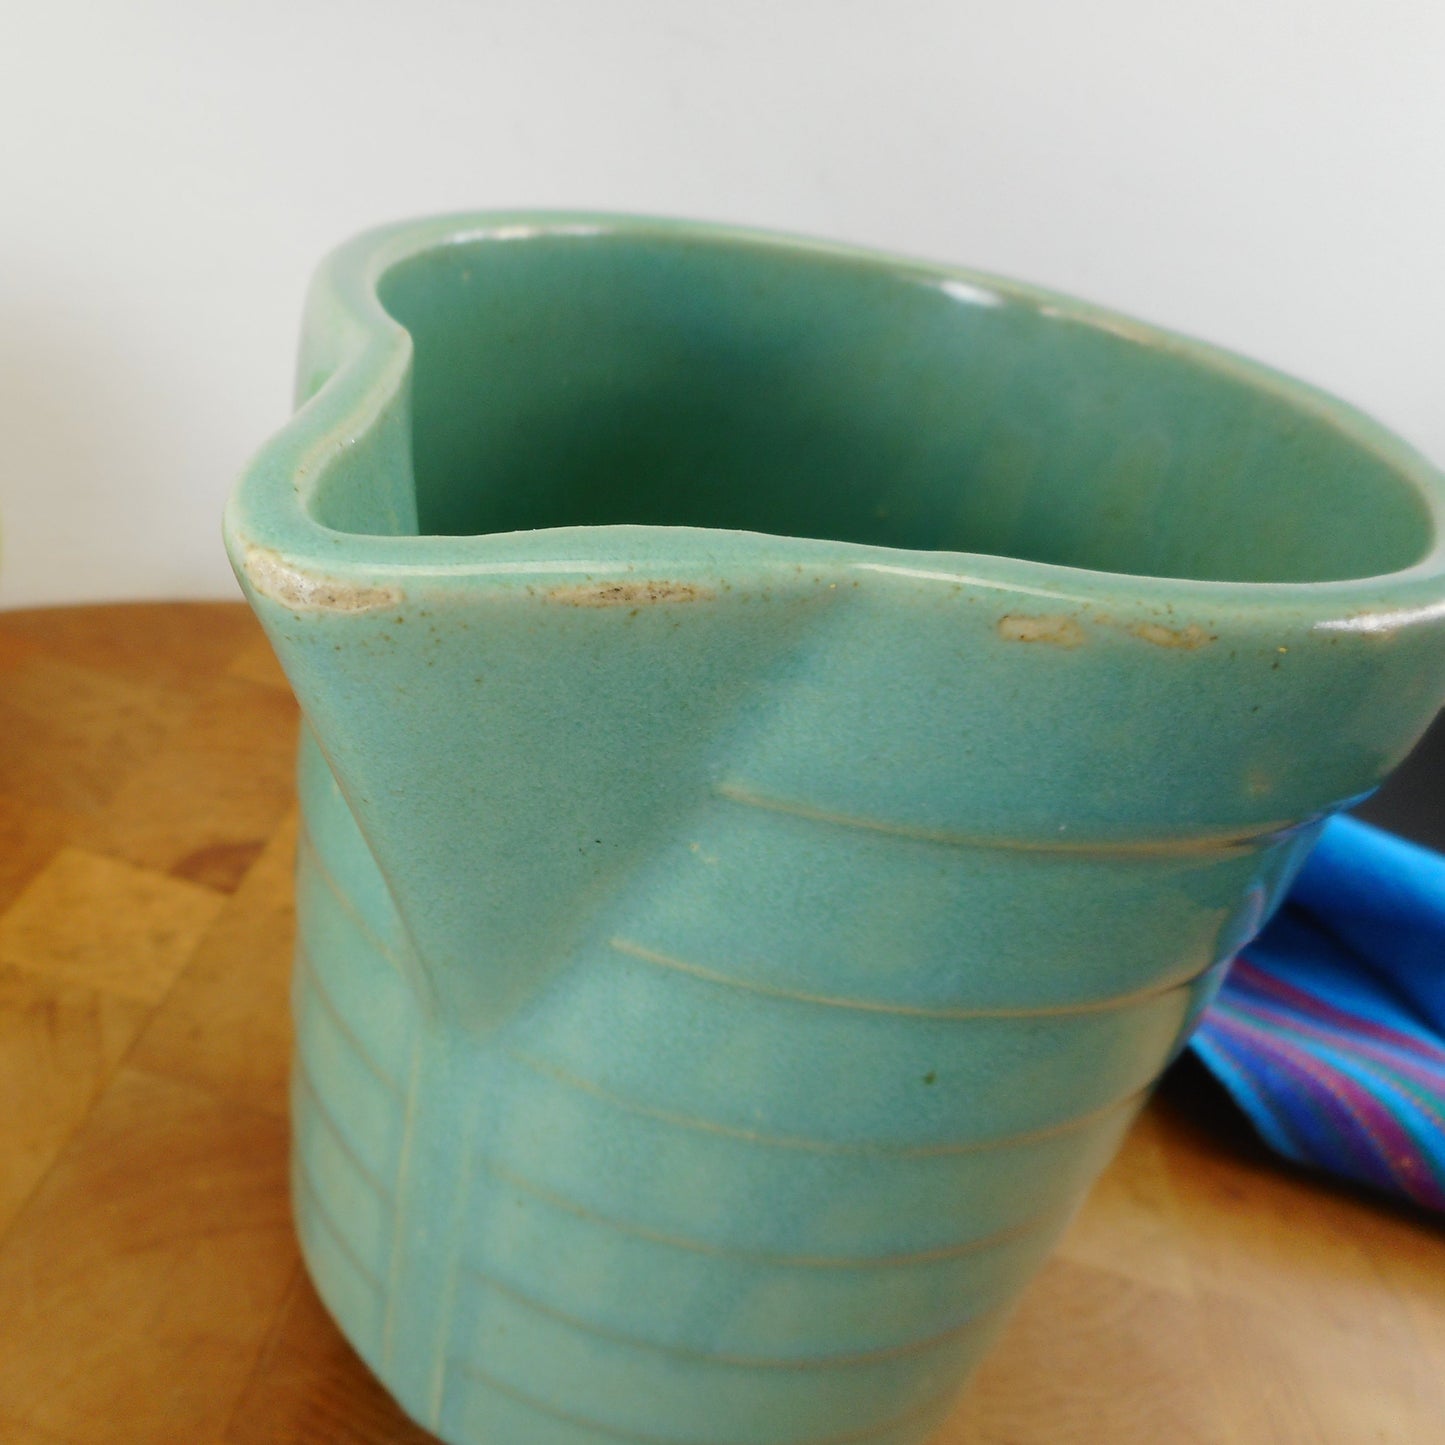 USA Vintage Unbranded 5" Turquoise Stoneware Pottery Pitcher - Bands Rings Ribs Concentric